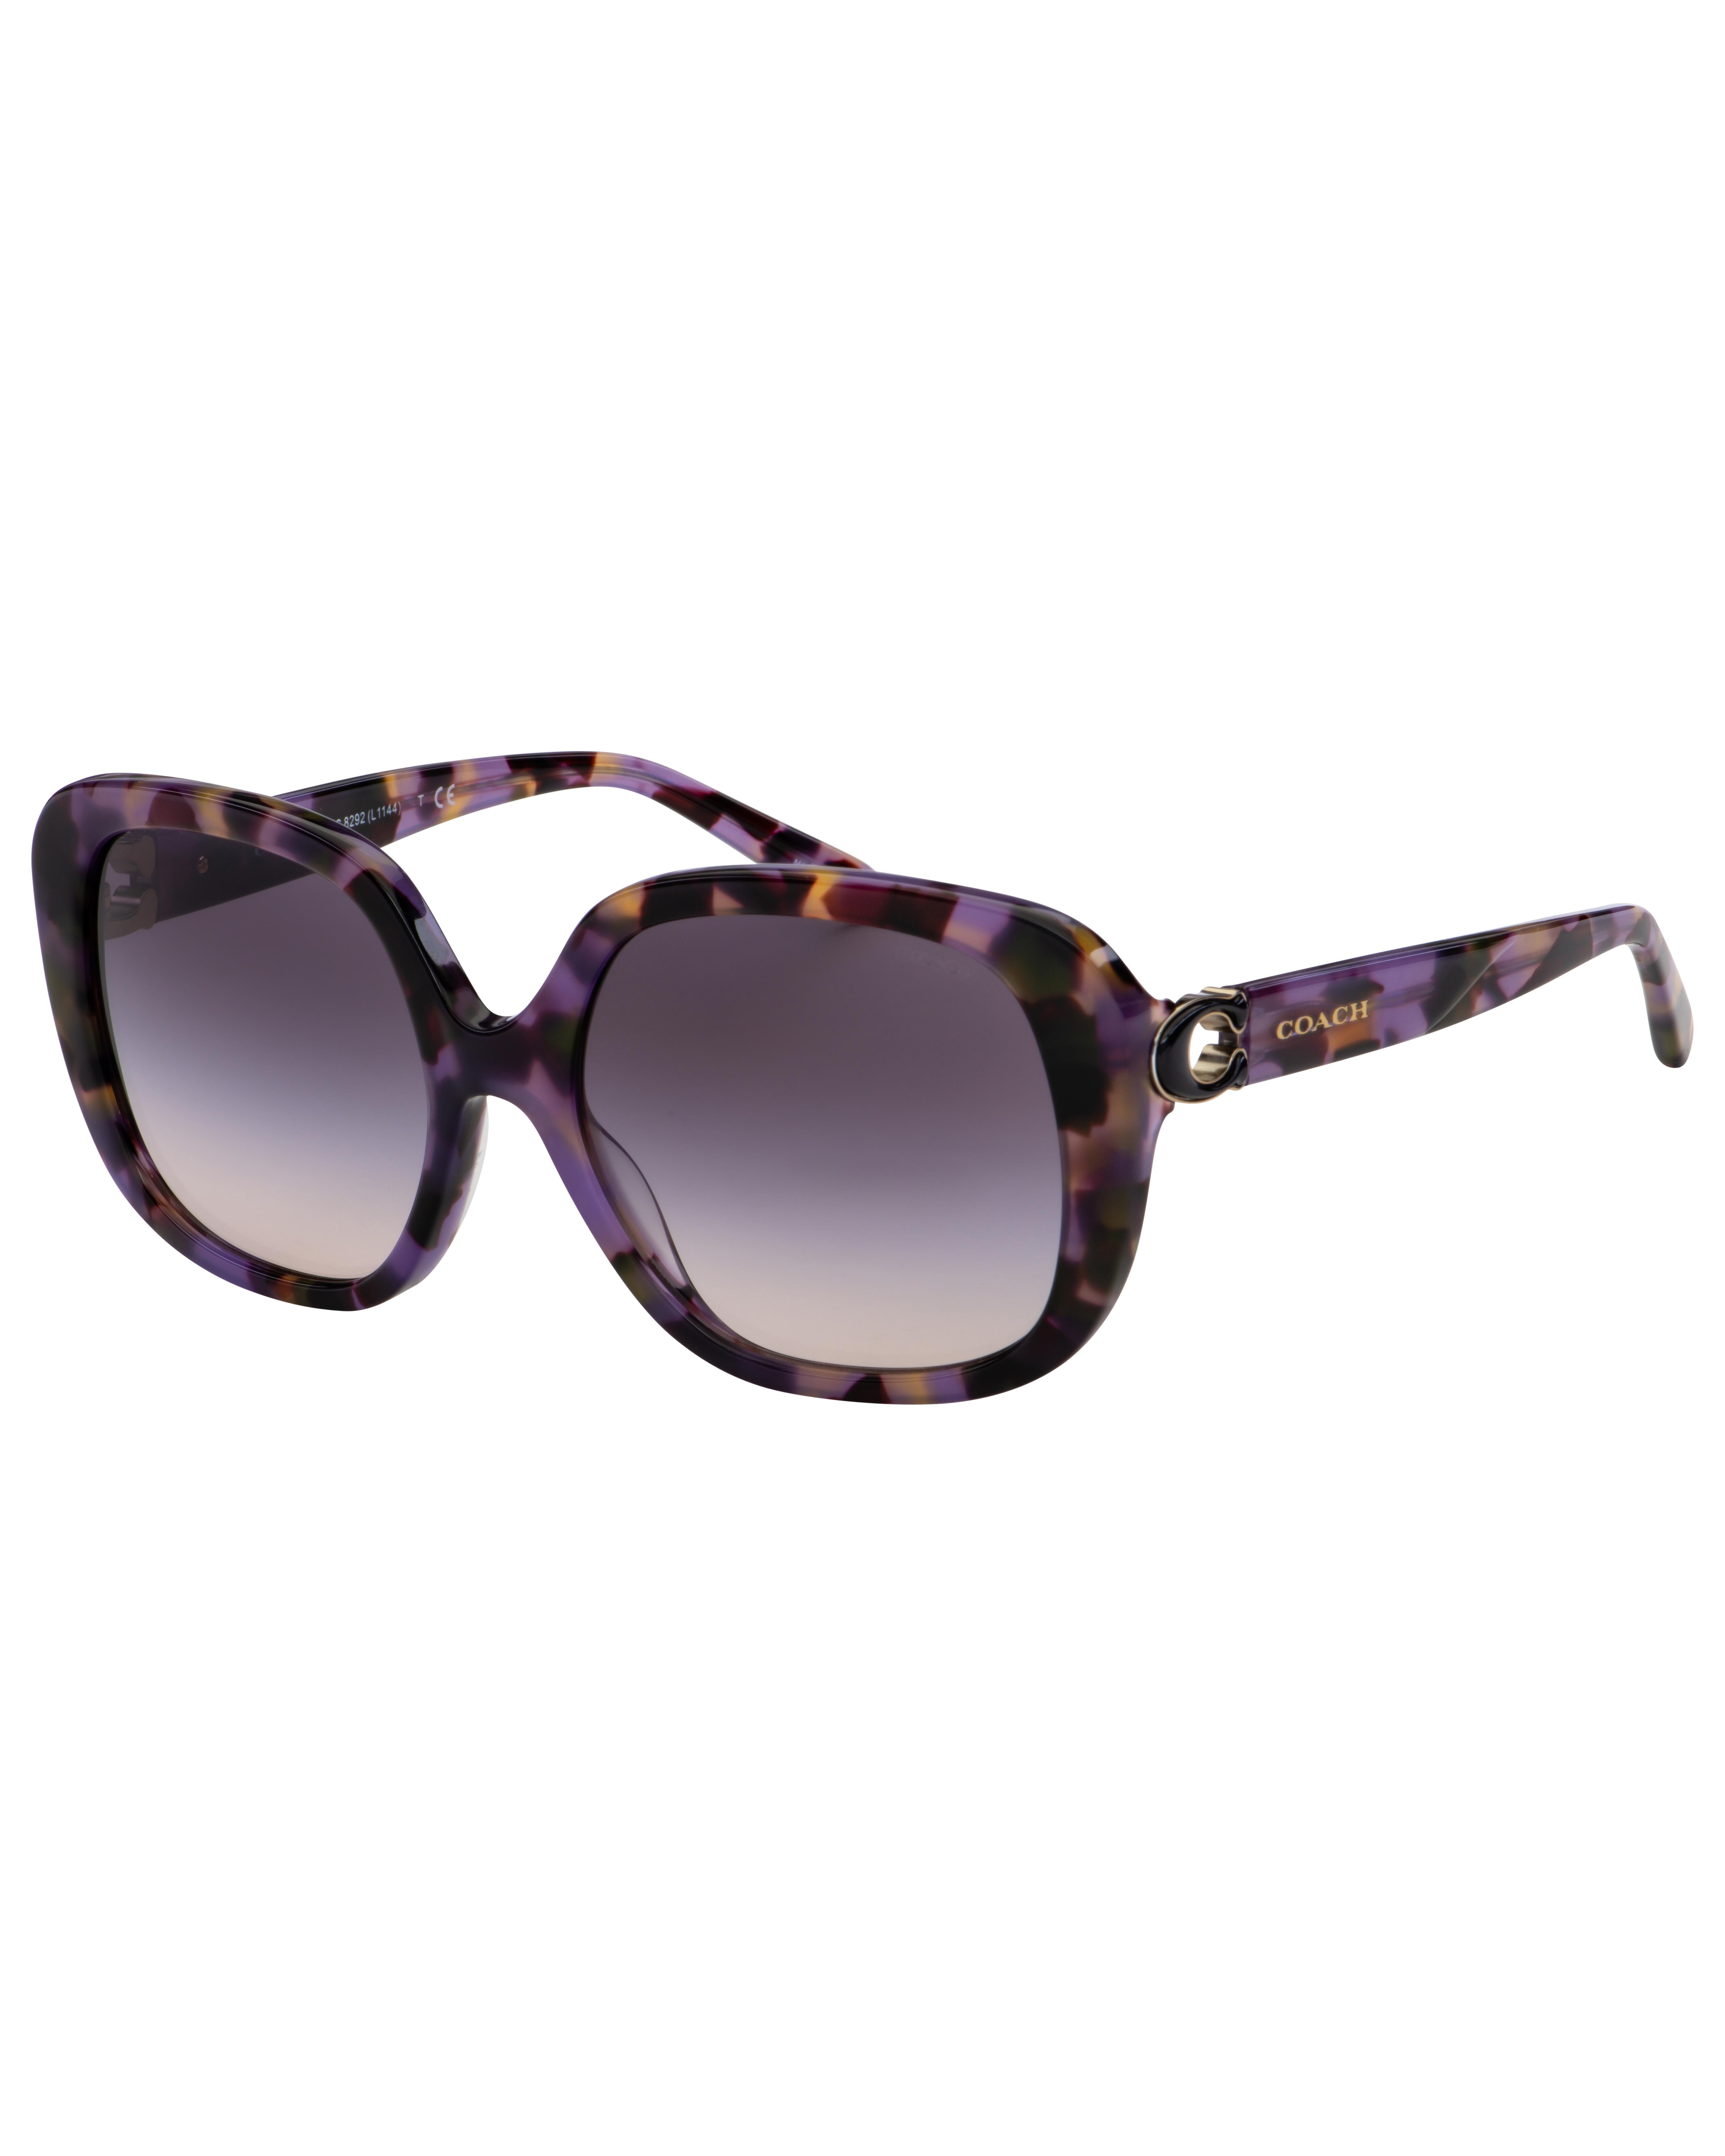 Coach Oversized Metal Soft Square Sunglasses in Pink tortoise - YouTube